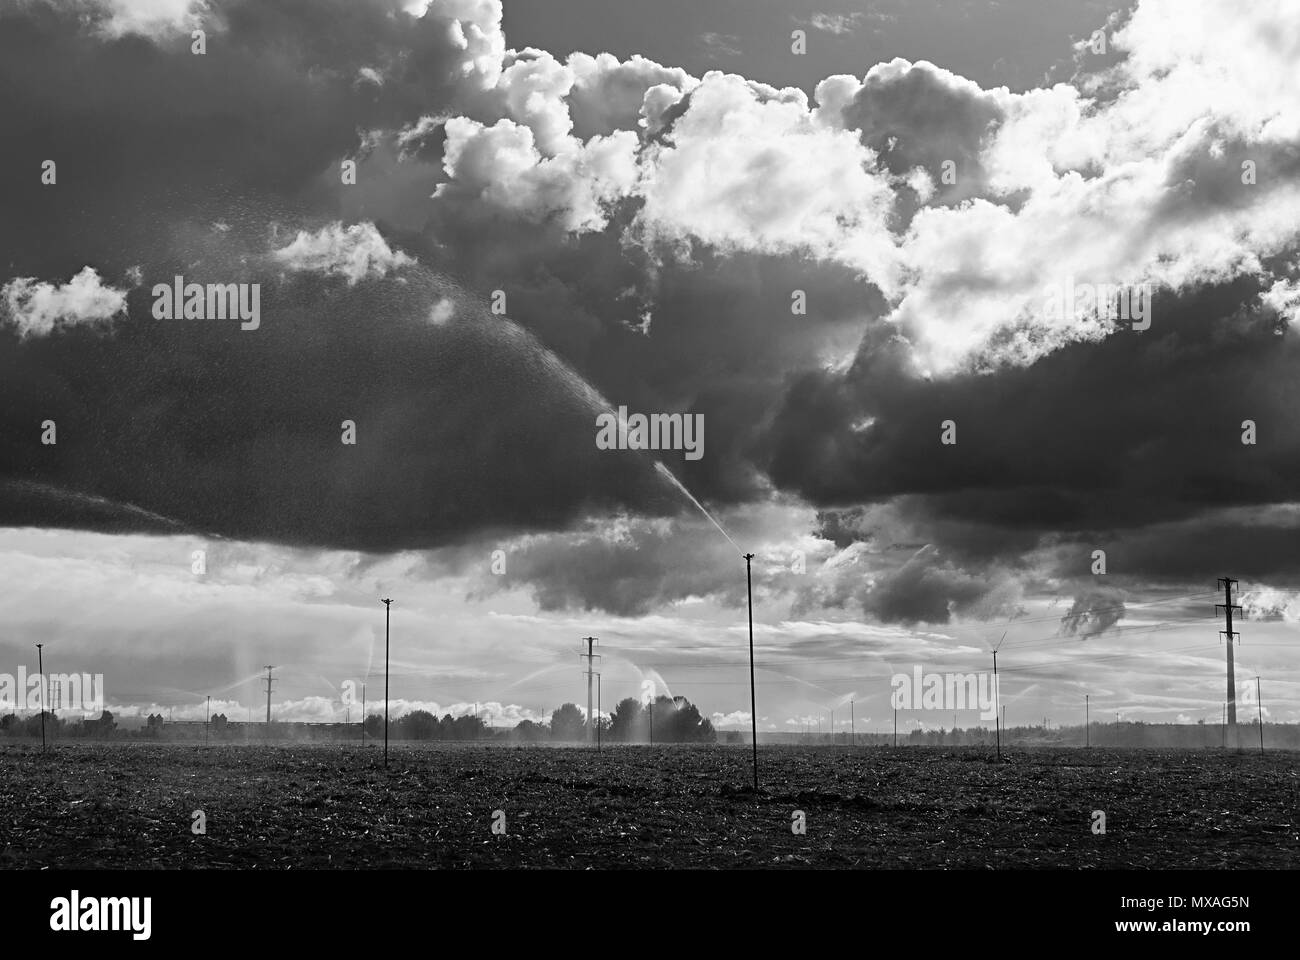 Field with sprinklers watering the sowing in a day with cloudy sky. Storm. Stock Photo